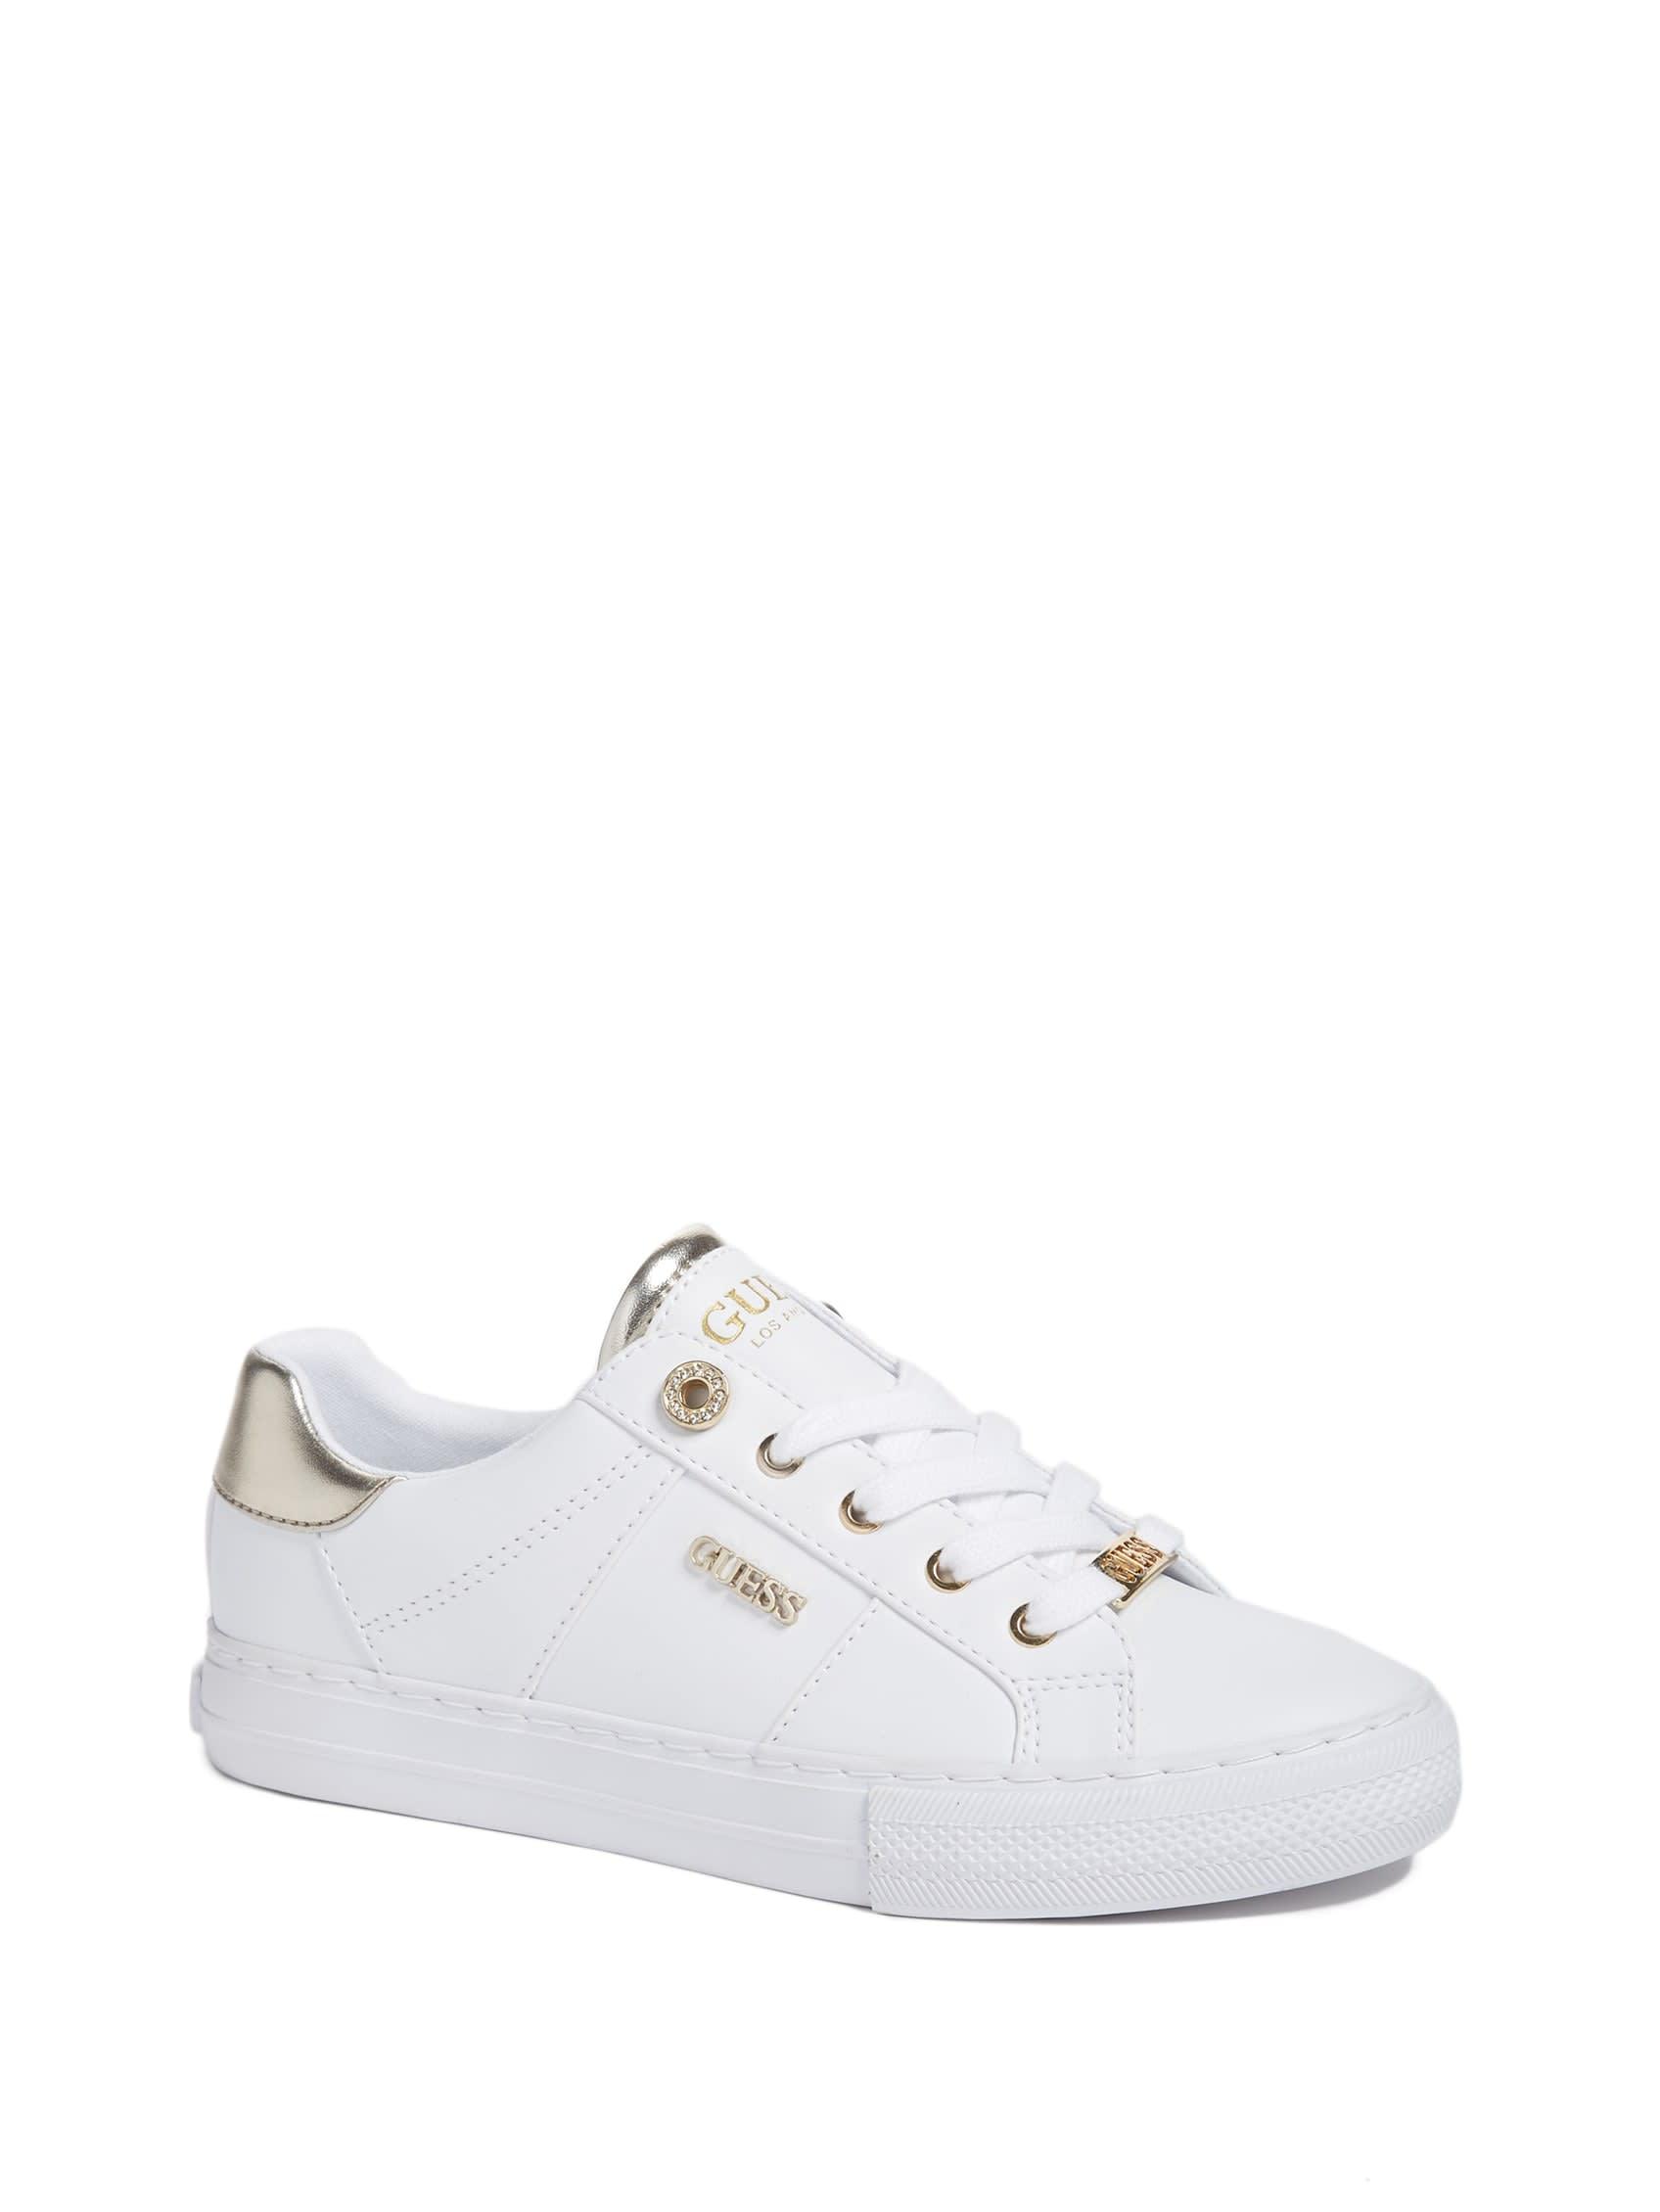 Guess Factory Look At Low-top Sneakers in | Lyst